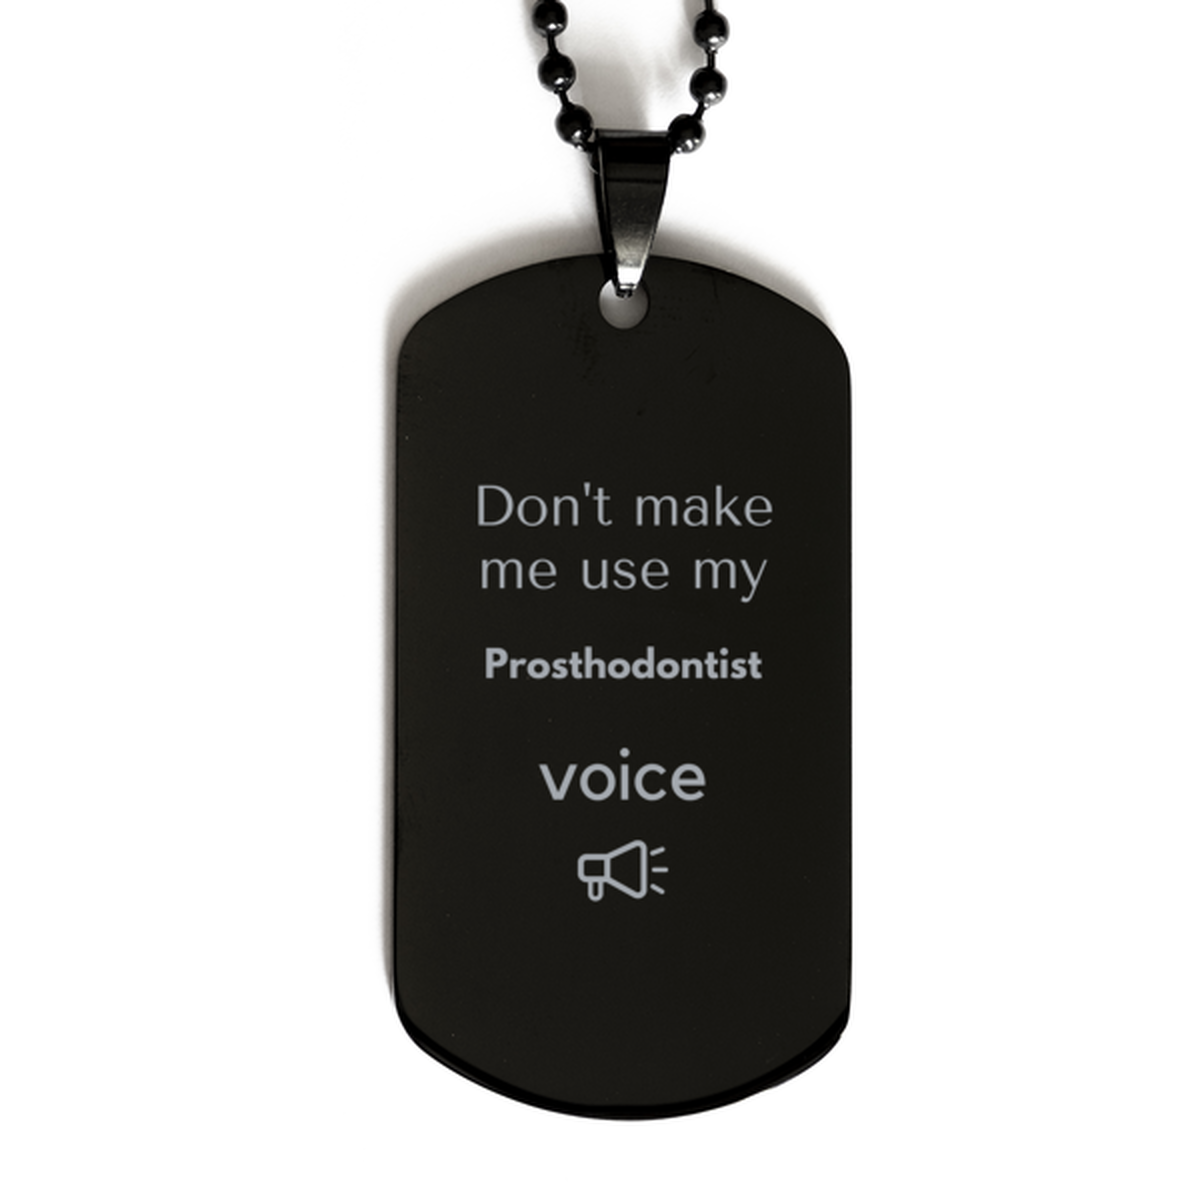 Don't make me use my Prosthodontist voice, Sarcasm Prosthodontist Gifts, Christmas Prosthodontist Black Dog Tag Birthday Unique Gifts For Prosthodontist Coworkers, Men, Women, Colleague, Friends